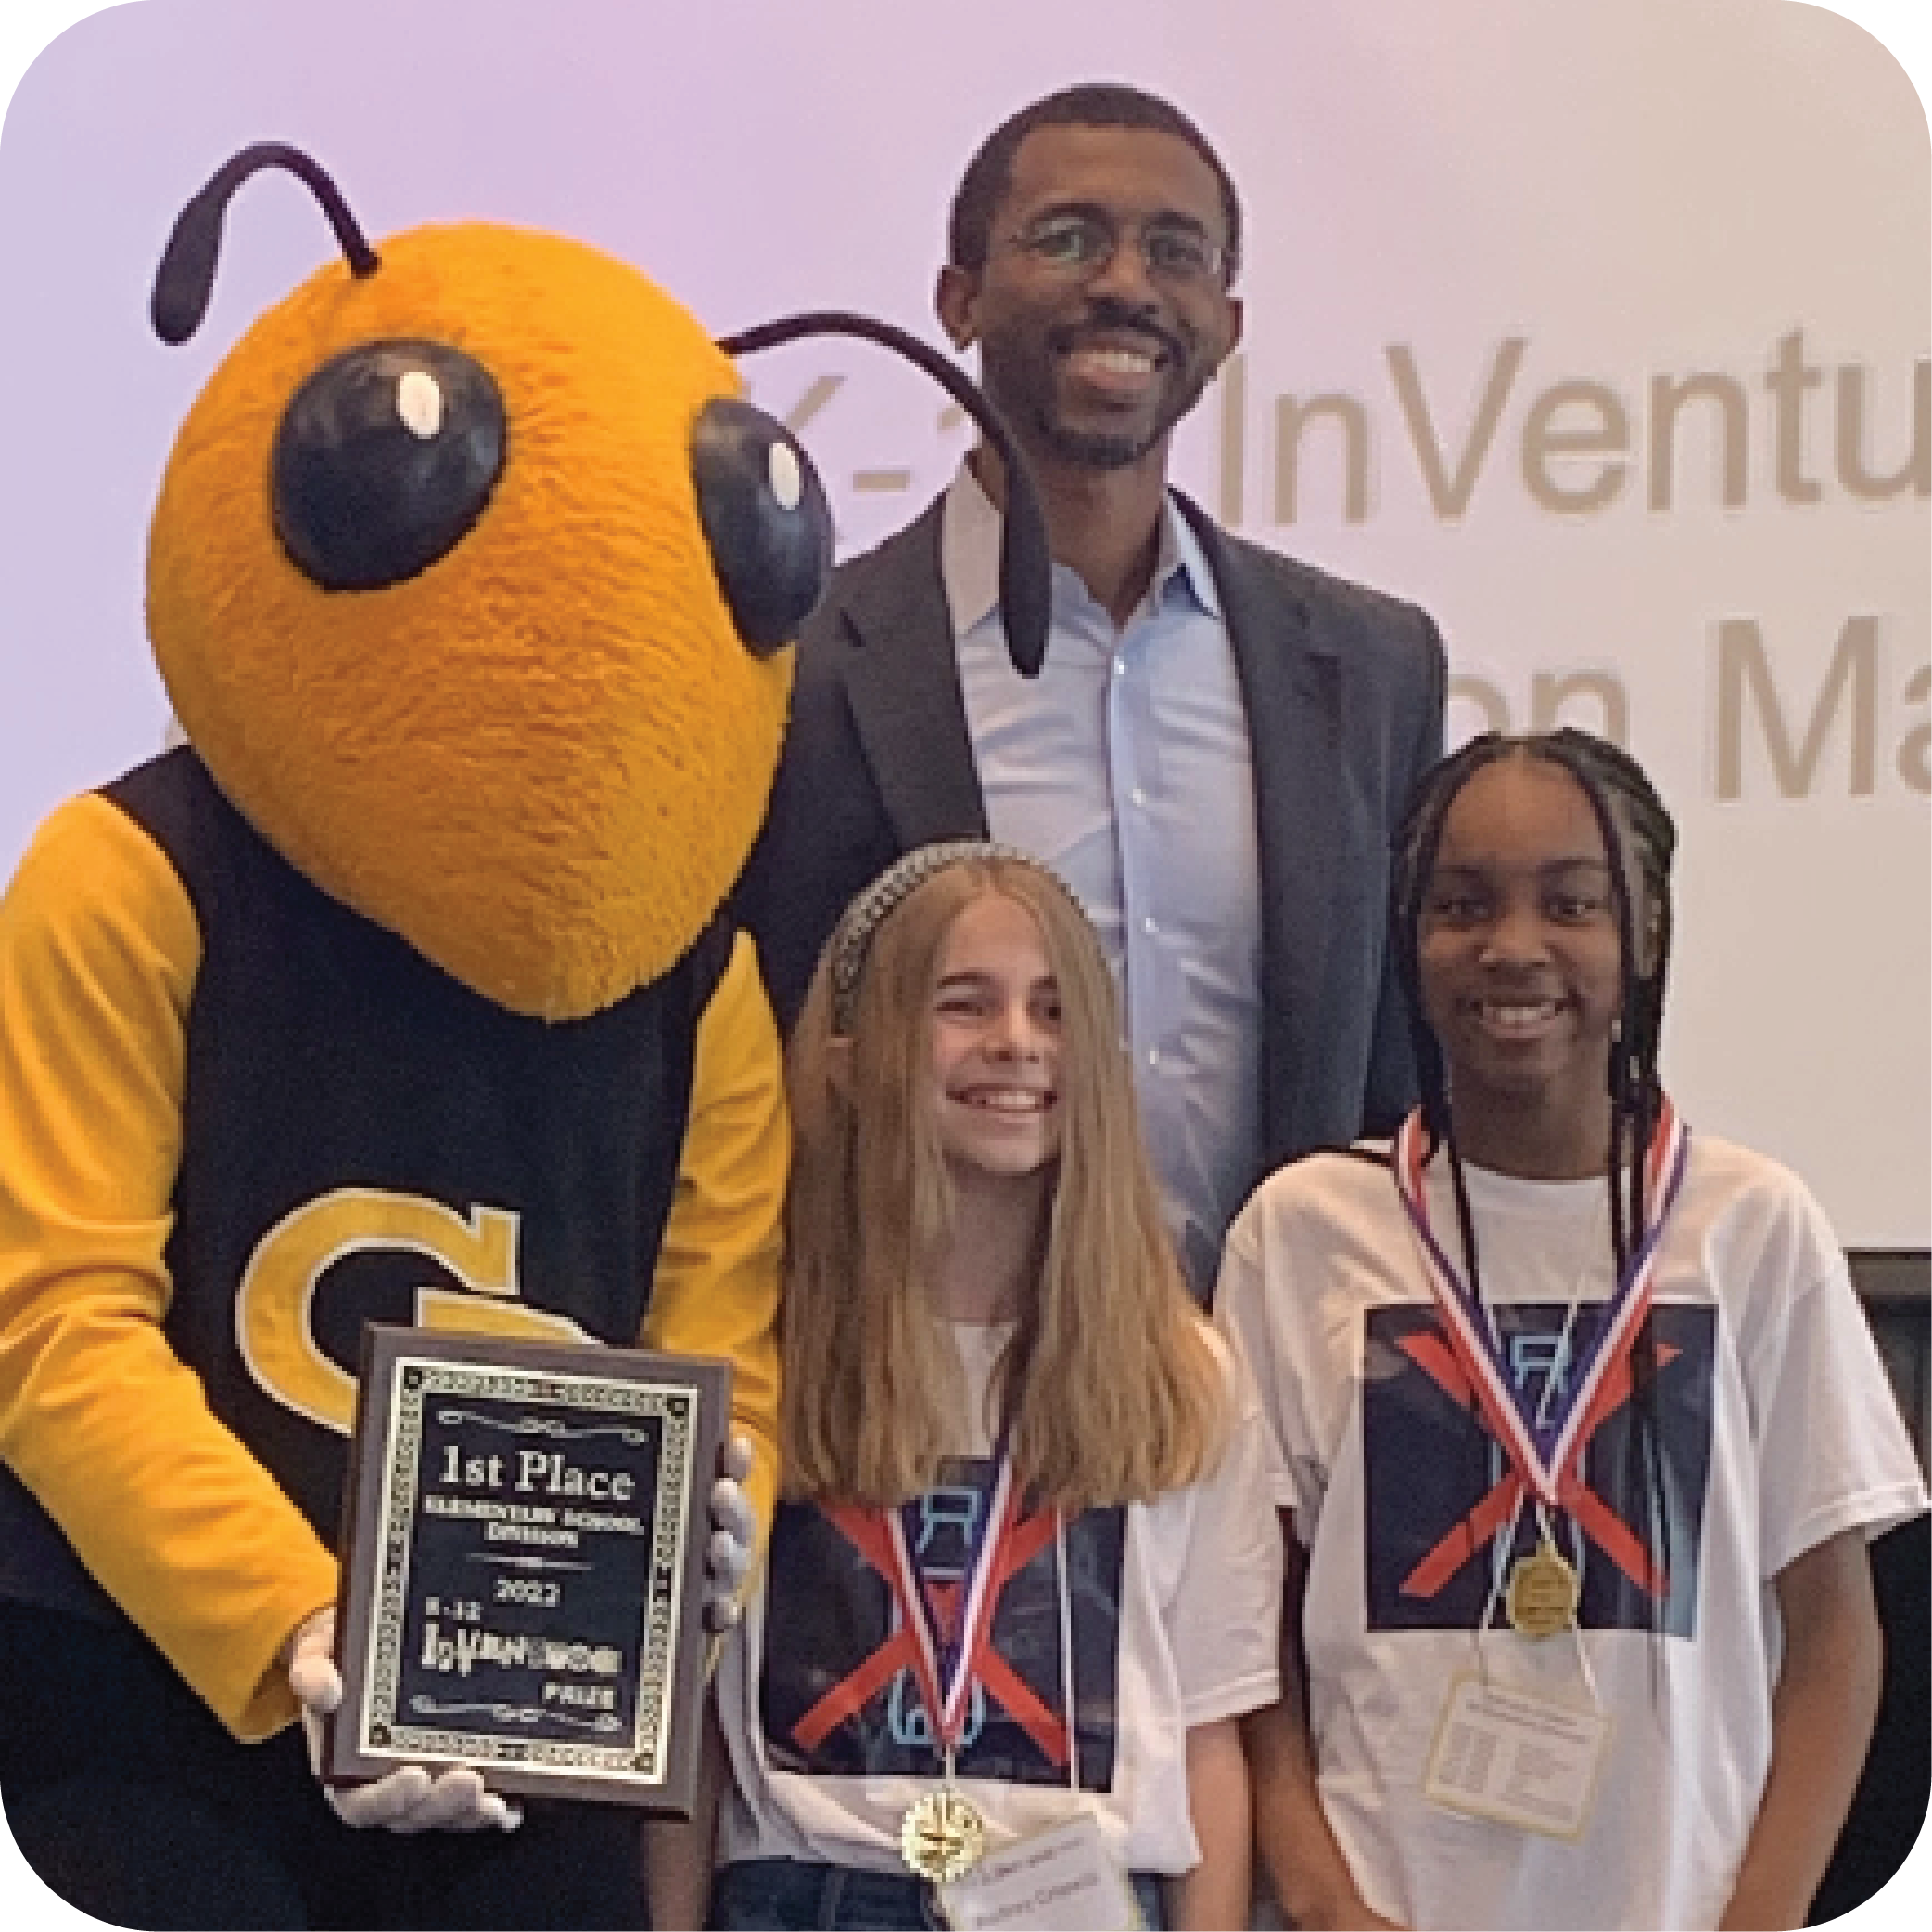 Two smiling students standing next to Buzz (Georgia Tech's yellowjacket mascot)holding a plaque and Craig Cupid (Georgia Intellectual Property and Alliance representative).